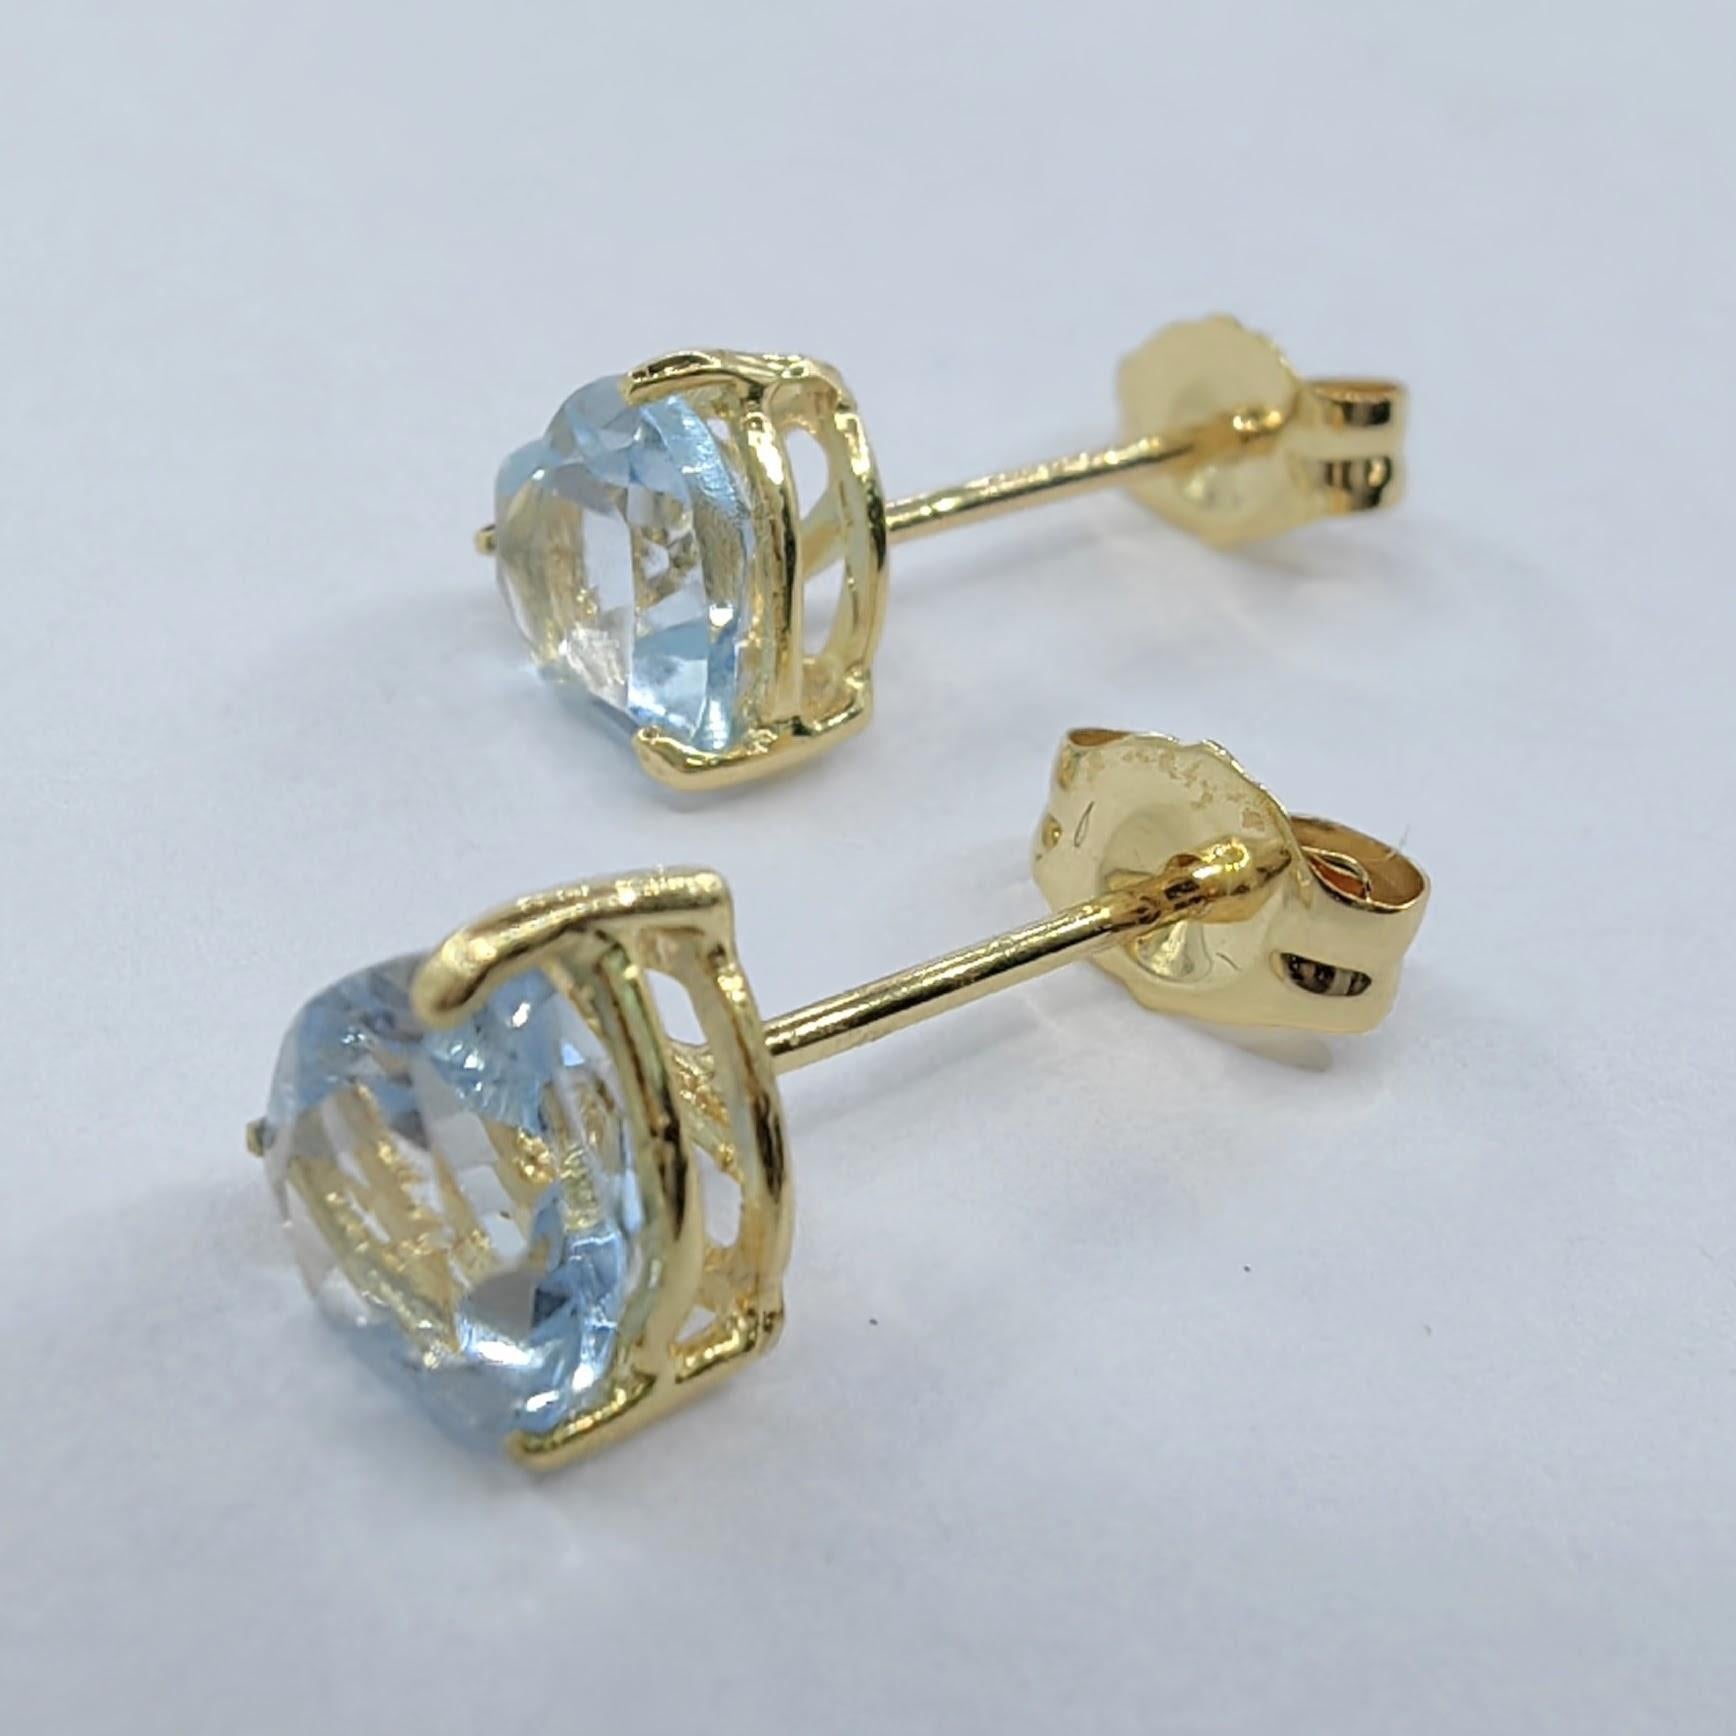 Introducing our Vintage 1980's Heart-cut Blue Topaz Stud Earrings in 14K Yellow Gold, a captivating pair that exudes timeless elegance. These exquisite earrings feature two heart-cut blue topaz gemstones, each measuring approximately 5.45mm x 5.40mm